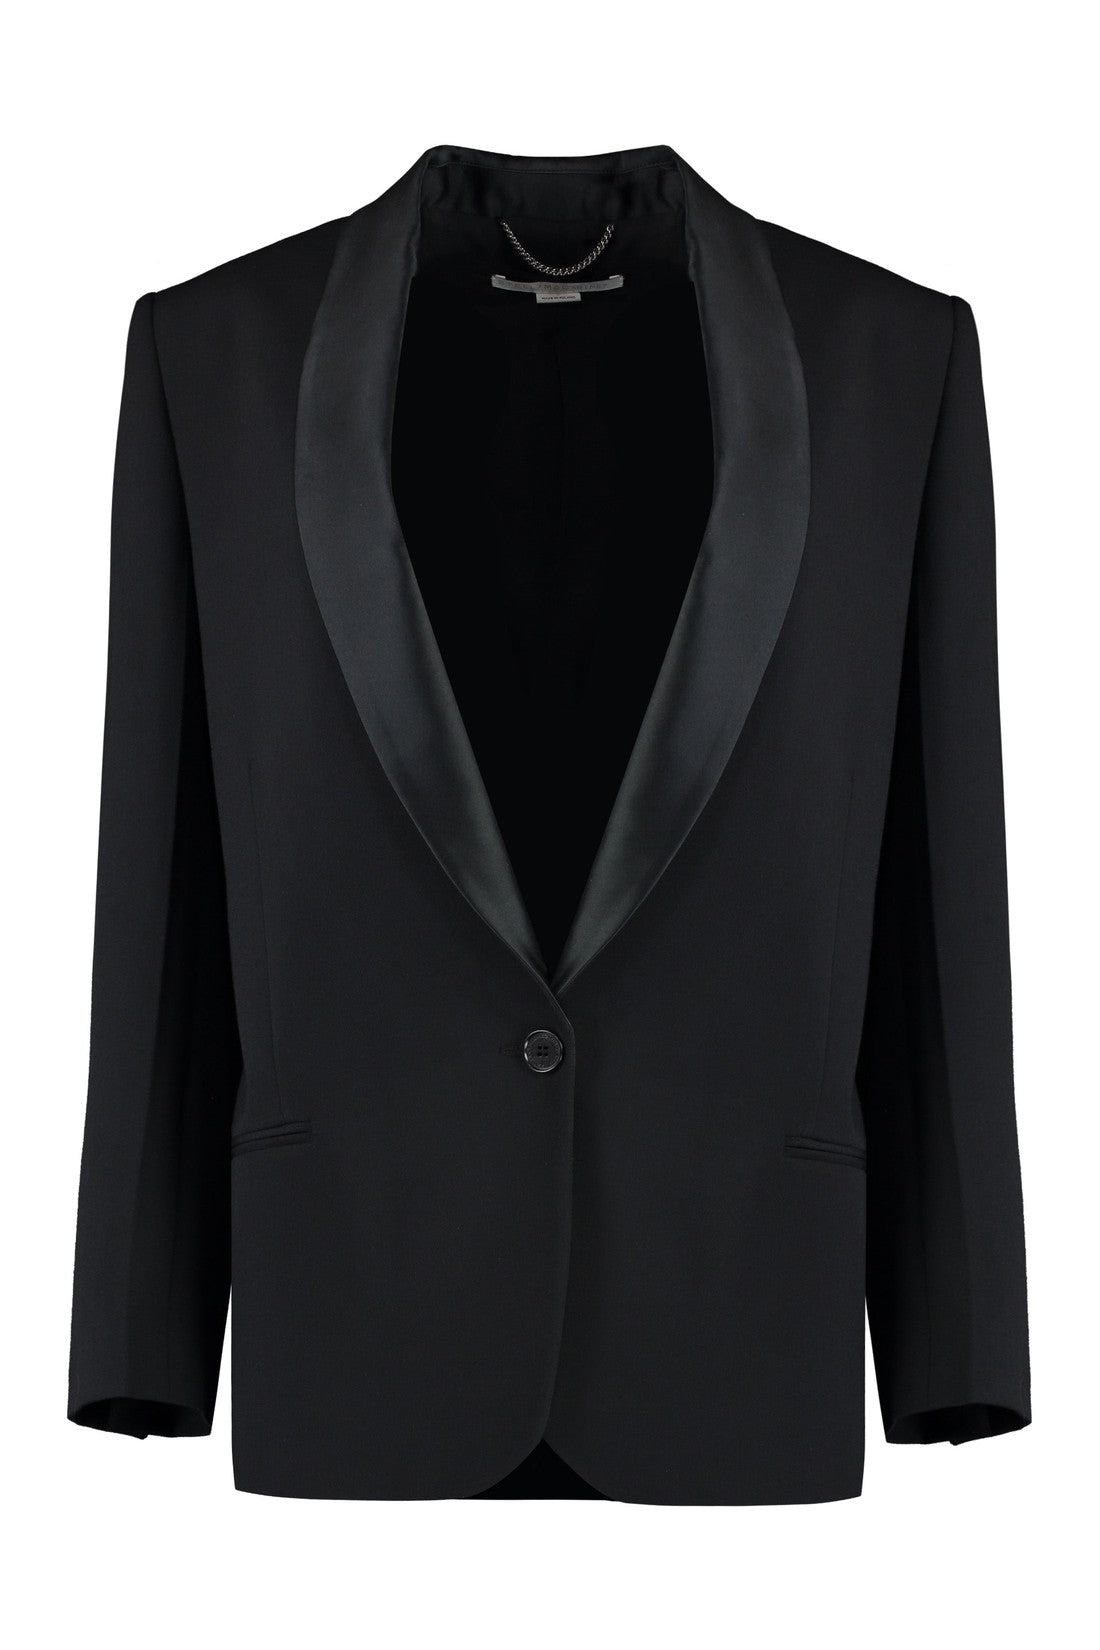 Stella McCartney-OUTLET-SALE-Single-breasted one button jacket-ARCHIVIST